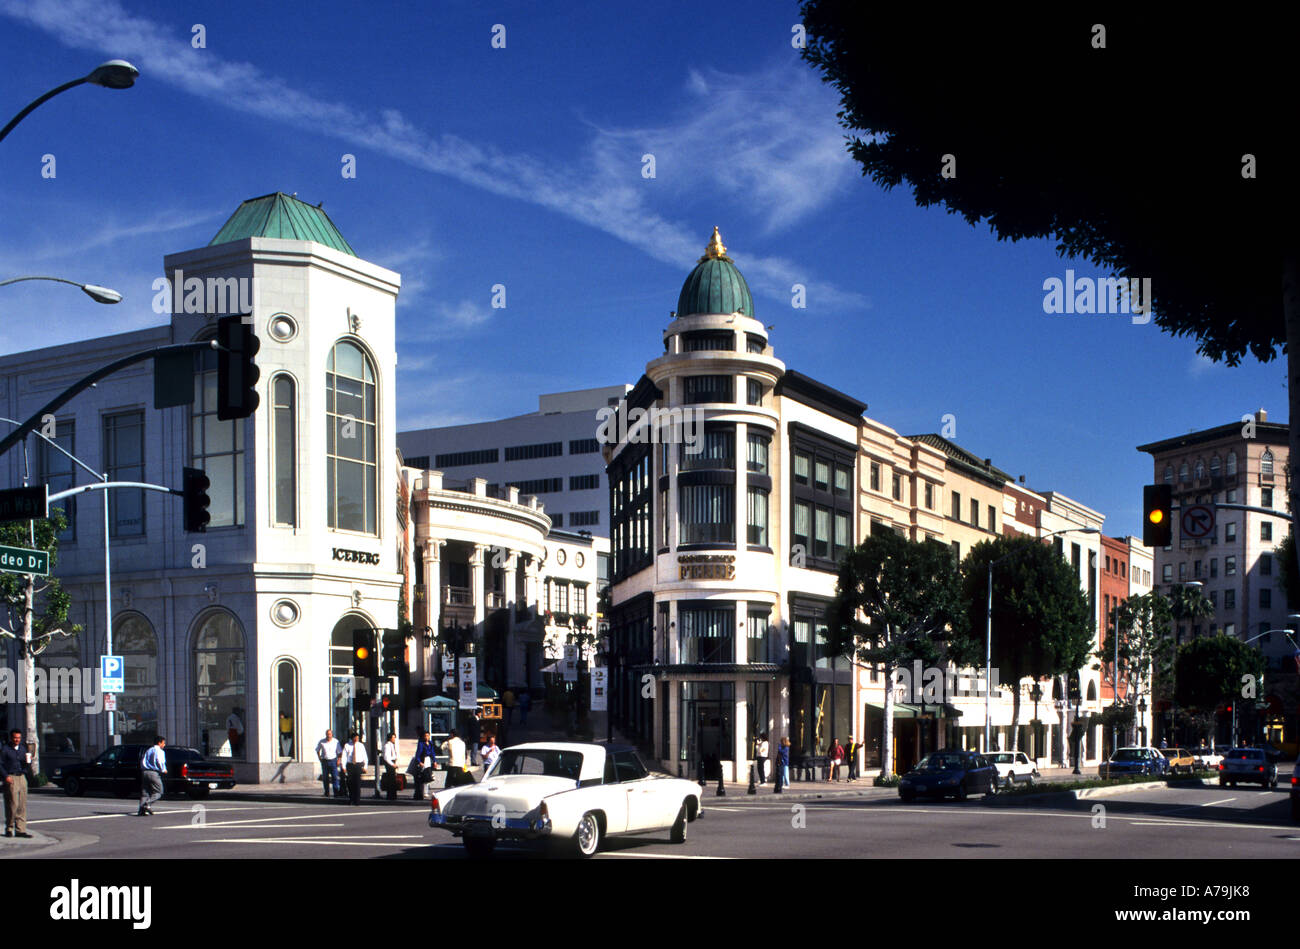 Tiffany & Co Rodeo Drive boutiques shops Beverly Hills Los Angeles California United States Stock Photo